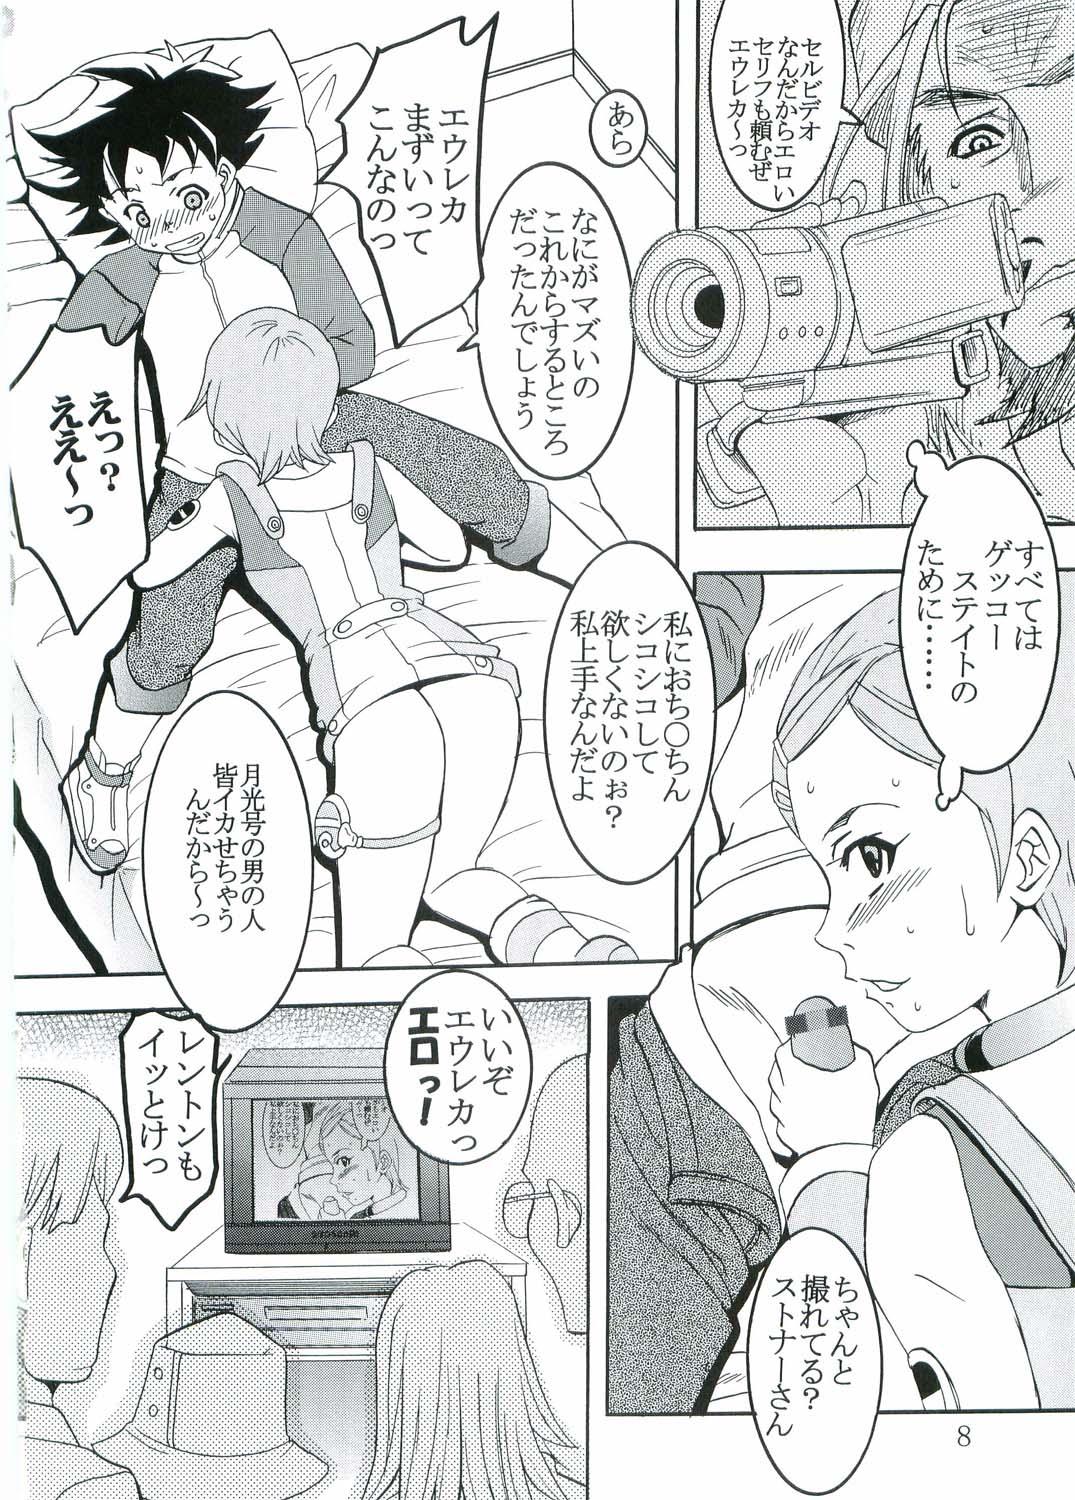 Finger Ura ray-out - Eureka 7 Lolicon - Page 9